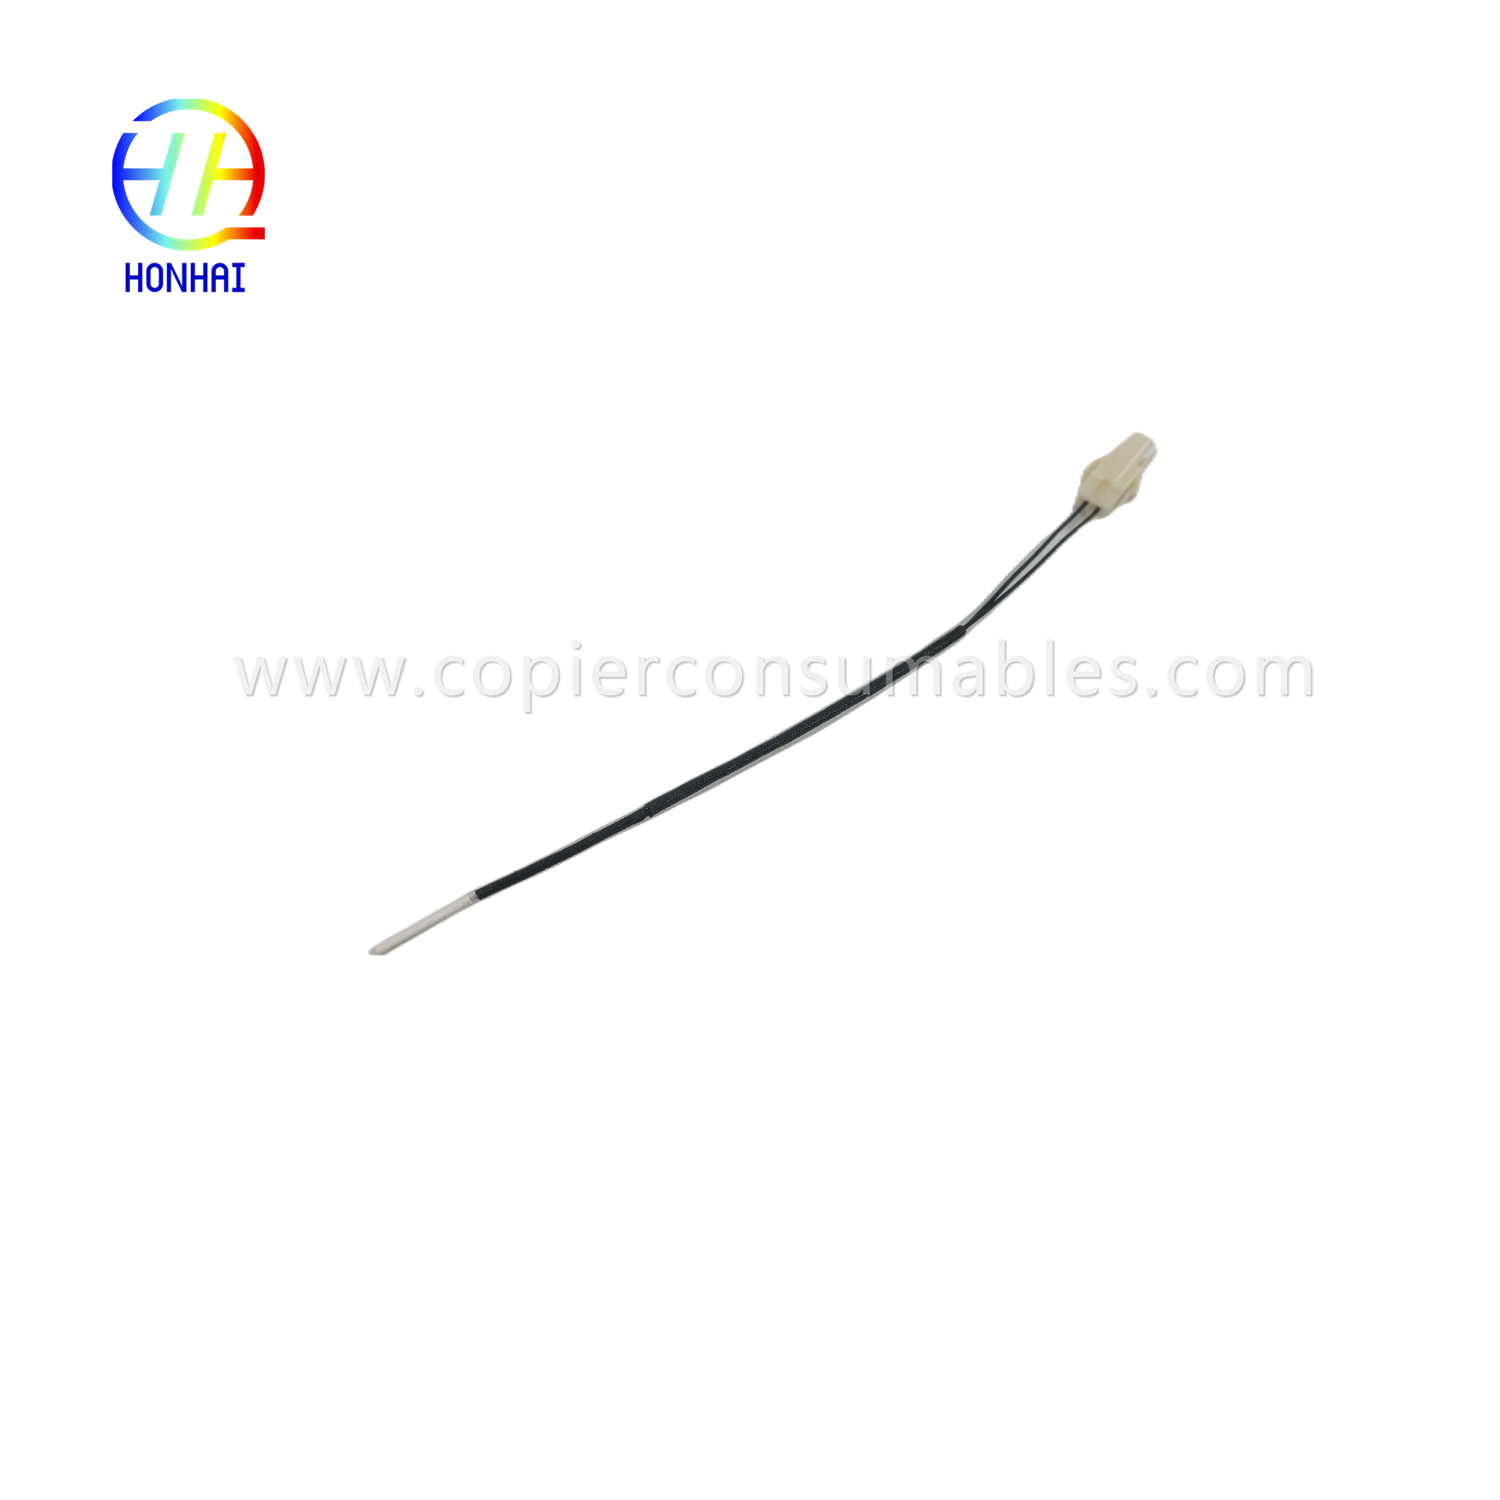 Fuser Thermistor cho OCE Pw300 340 350 360 365 TDS100 320 400 450 500 7050 9300 9400